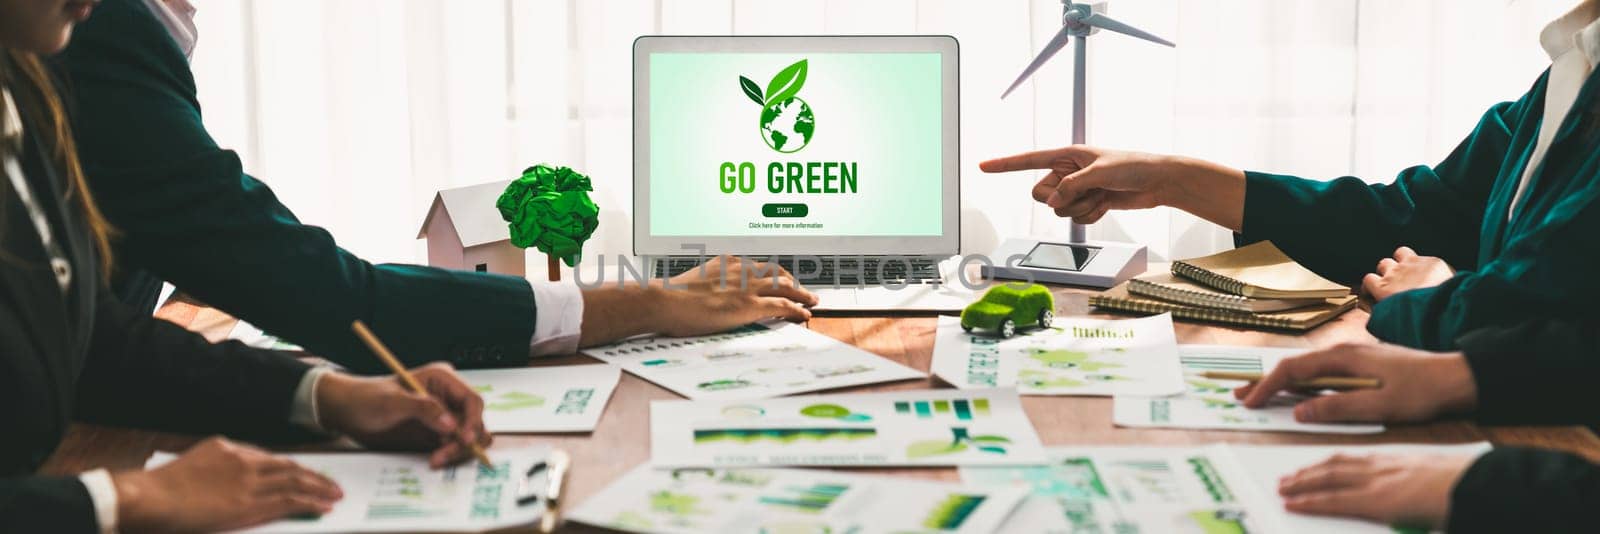 Go green ecology awareness campaign display on laptop on eco-friendly company meeting with business people implementing environmental protection for clean and sustainable future ecology. Trailblazing